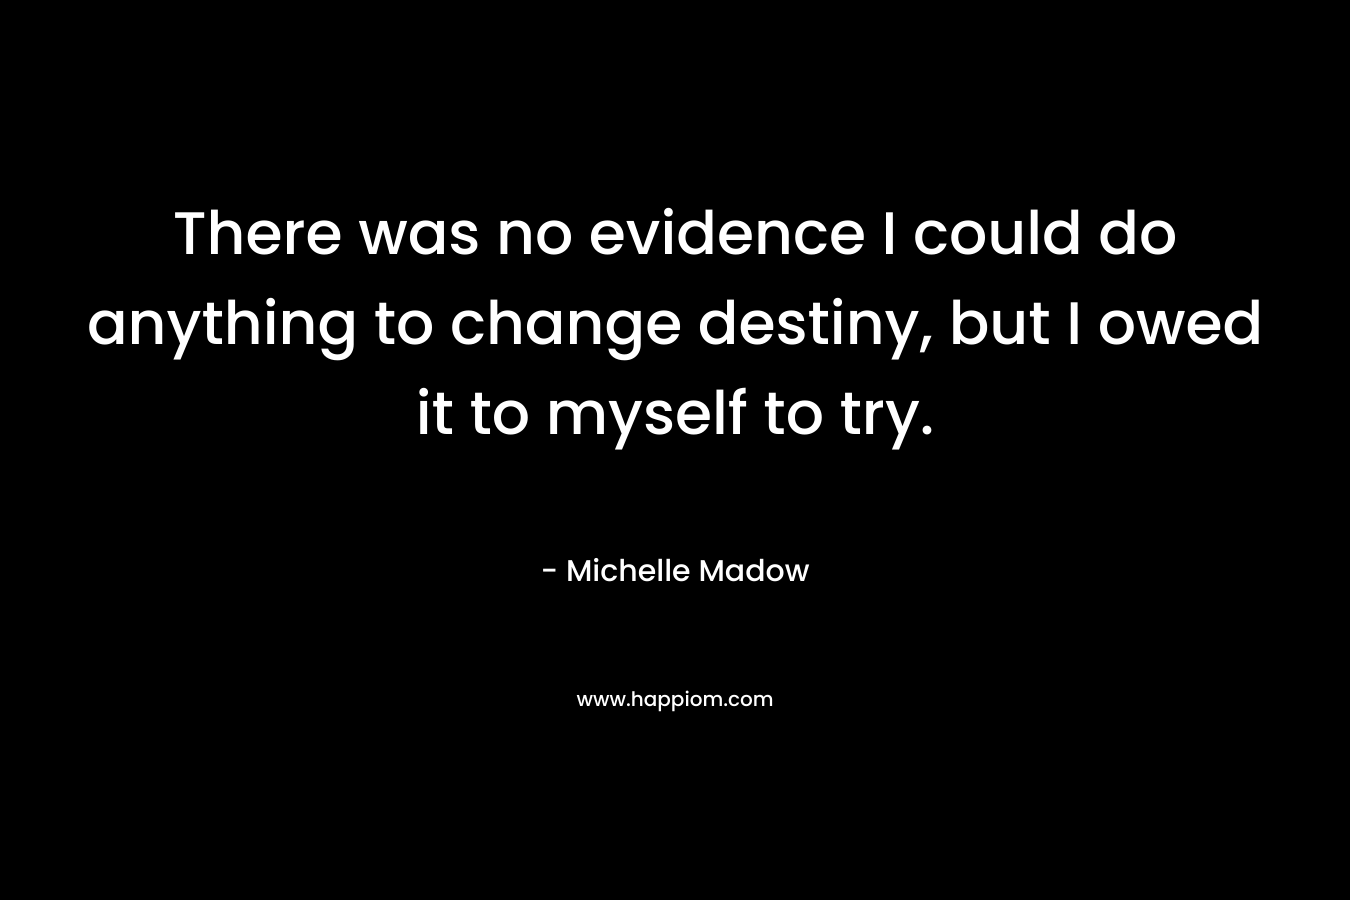 There was no evidence I could do anything to change destiny, but I owed it to myself to try.